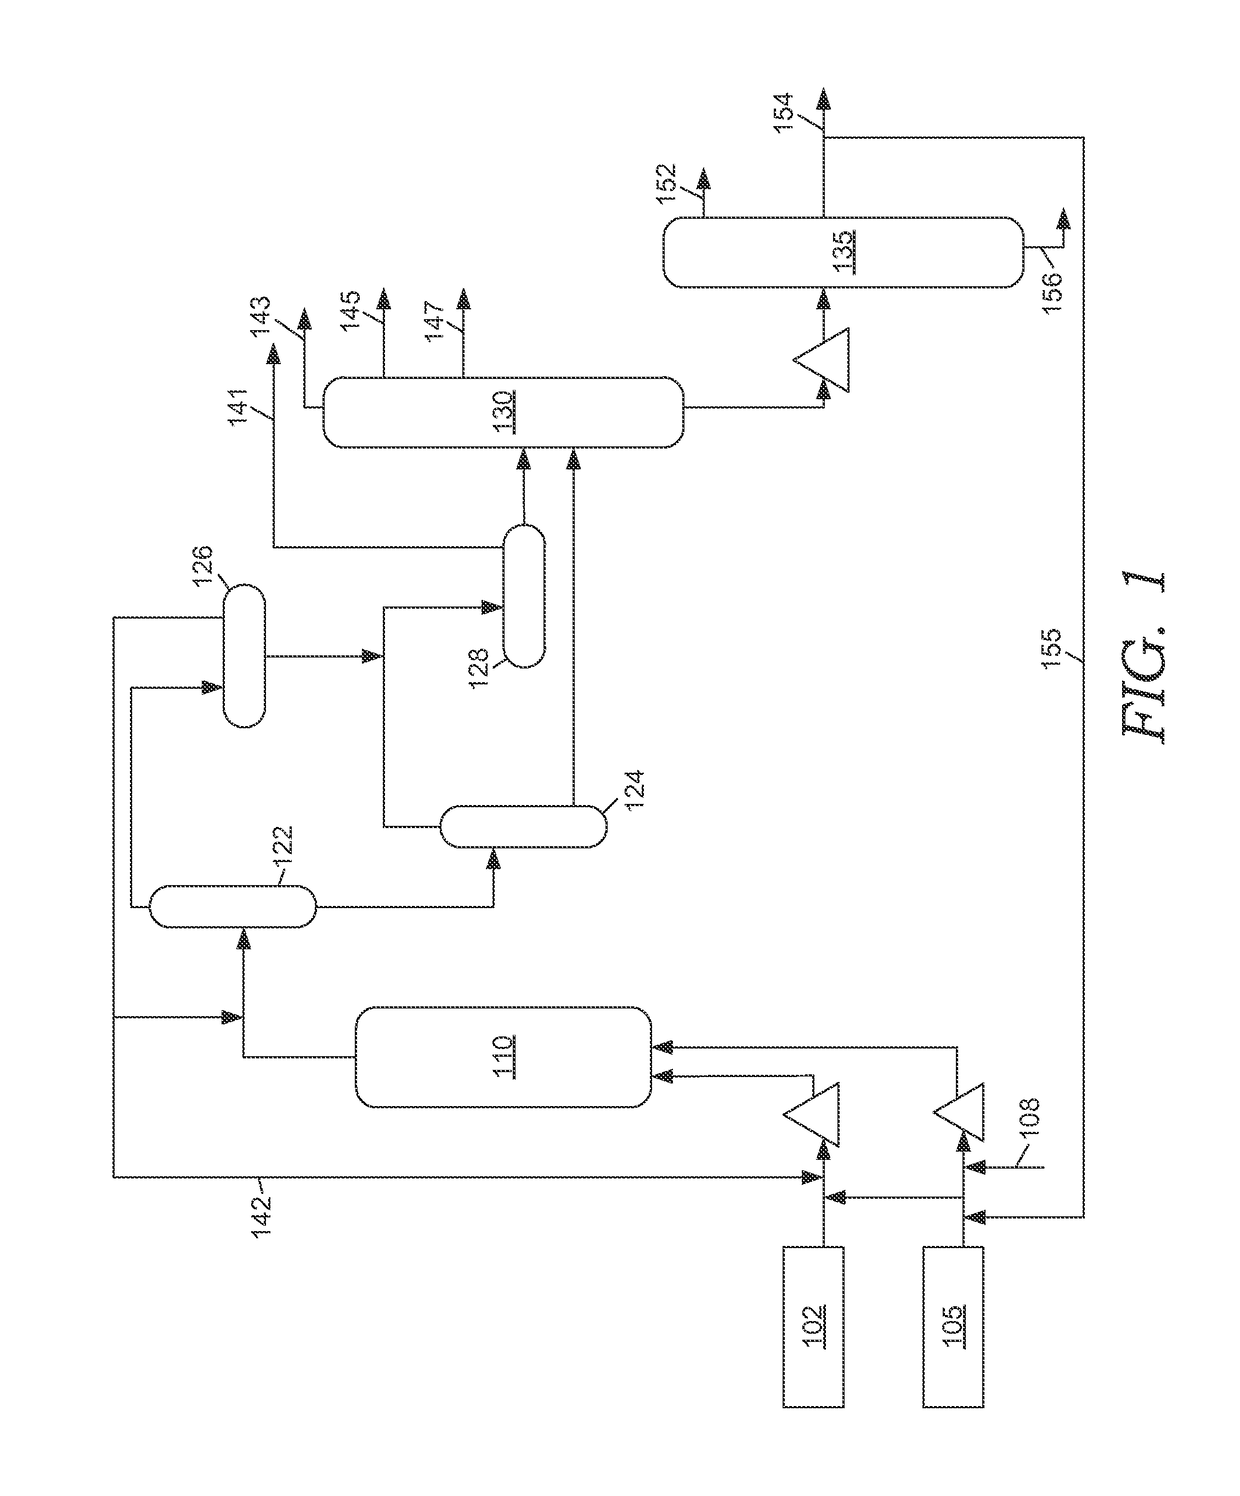 Staged solvent assisted hydroprocessing and resid hydroconversion